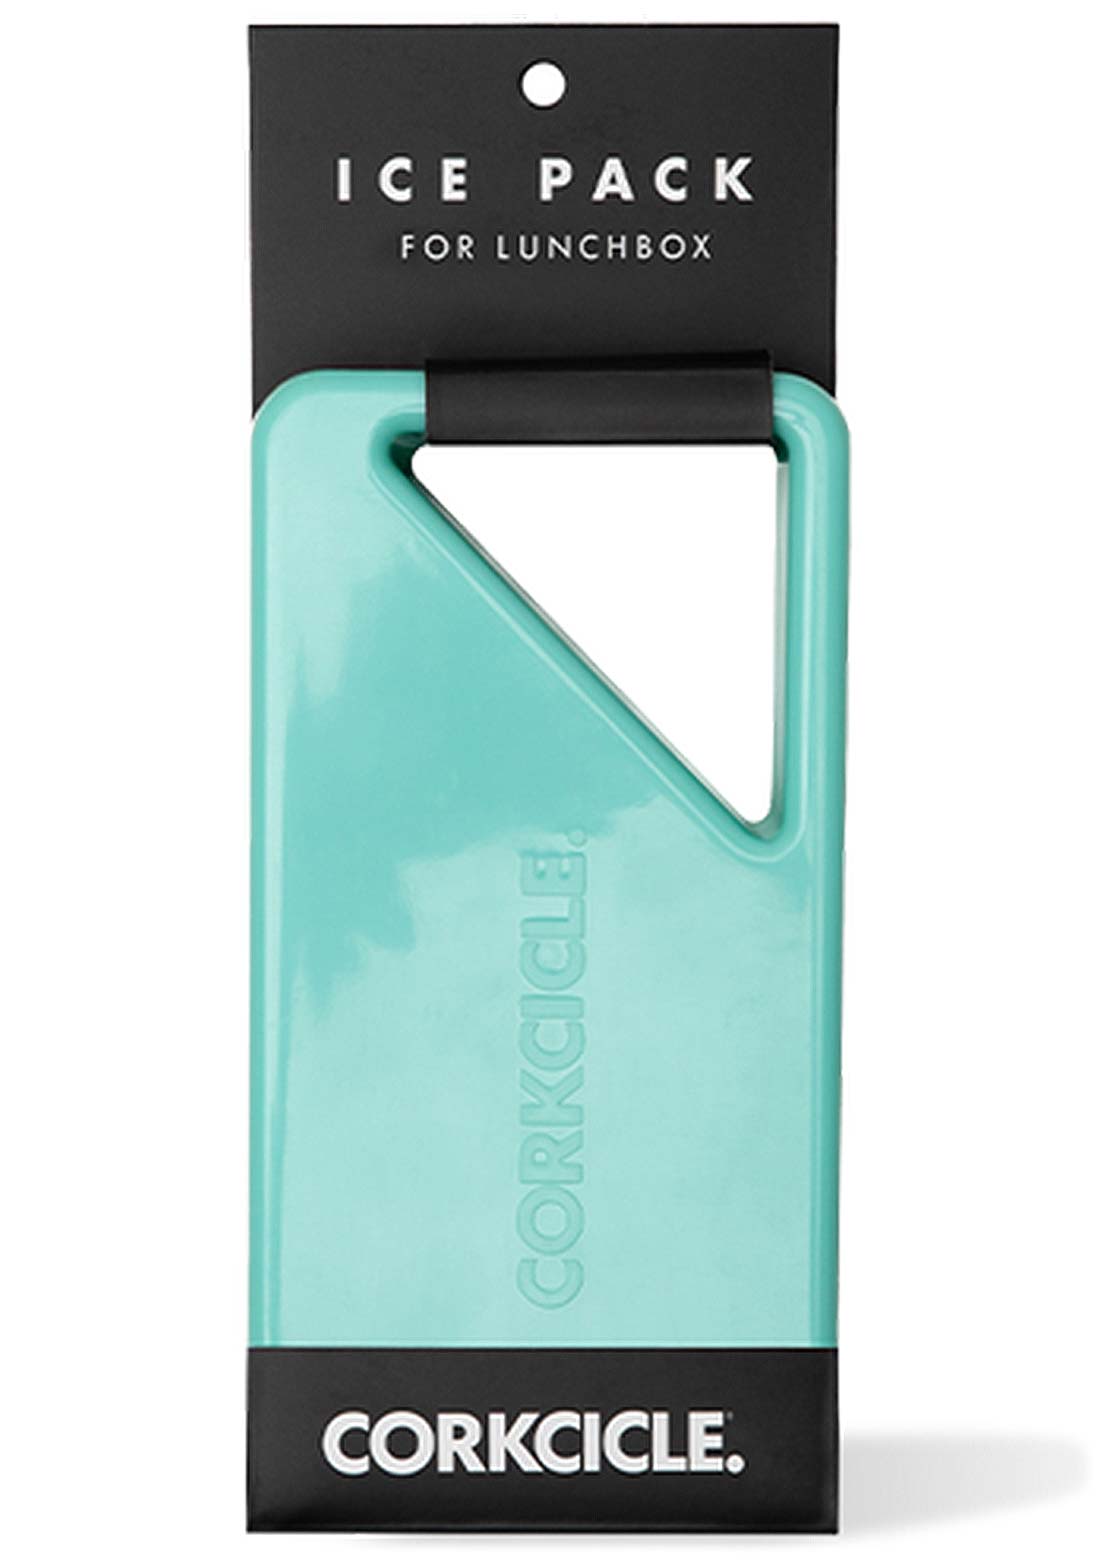 Corkcicle Lunchbox Ice Pack Turquoise